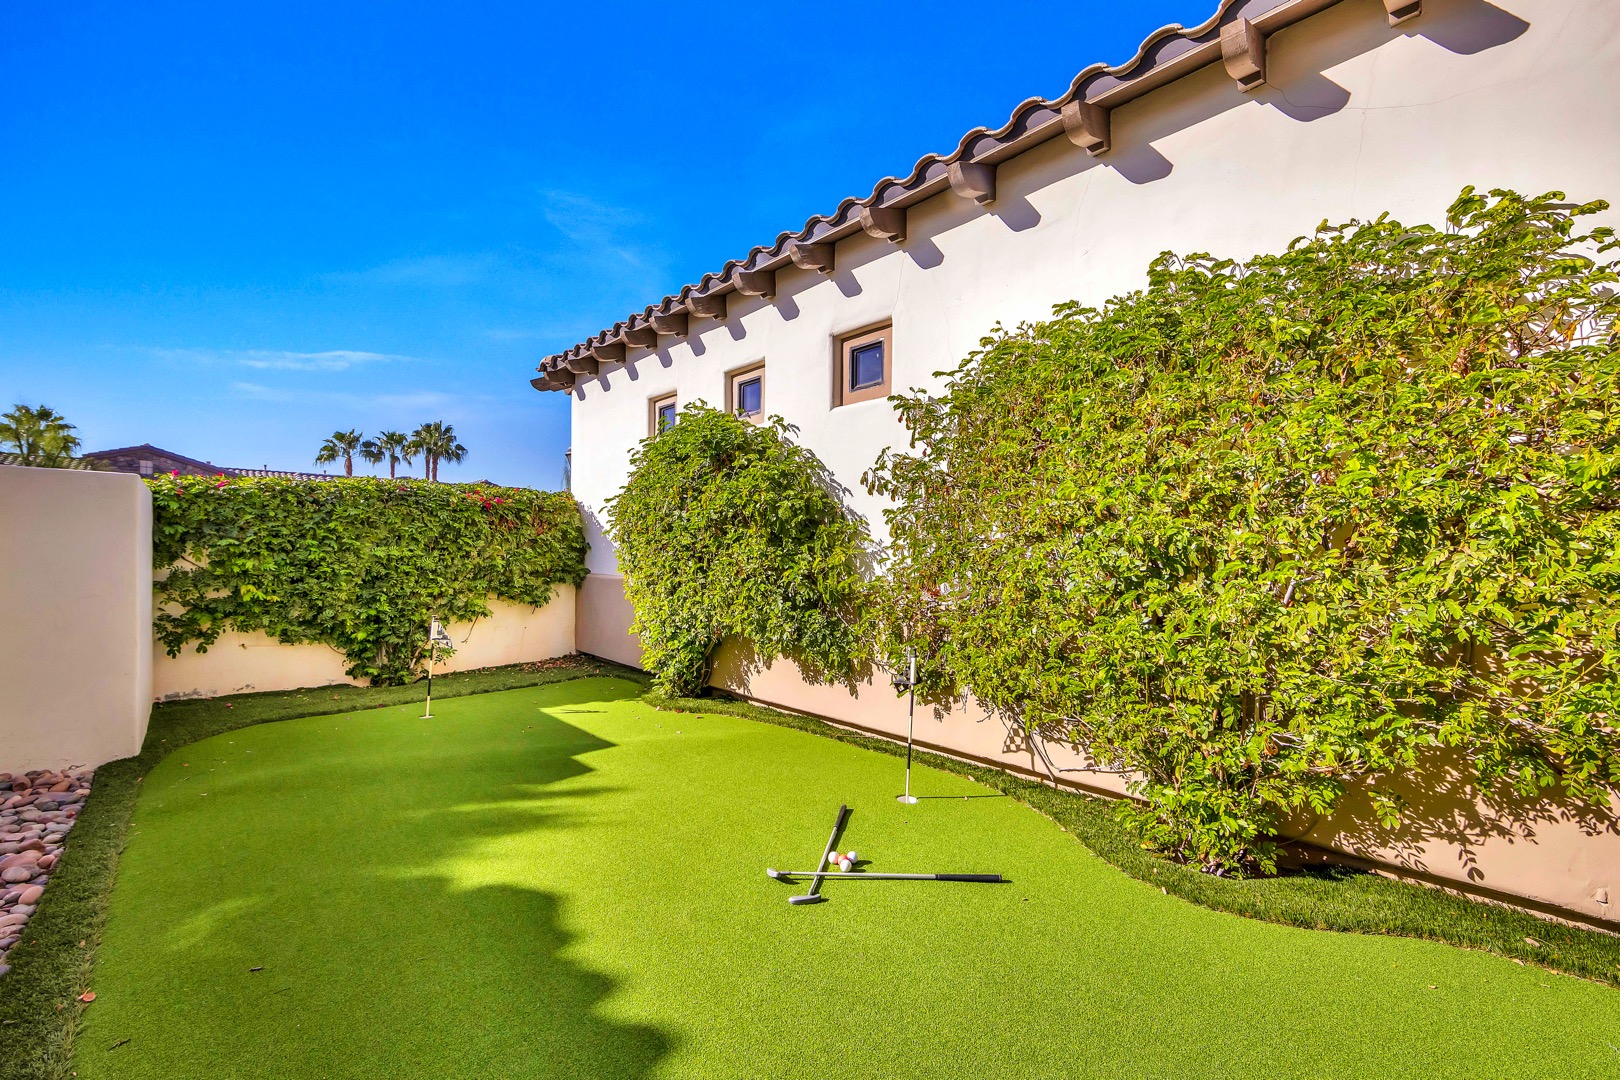 The owner made use of the oversized courtyard and put in a putting green to challenge your golf skills